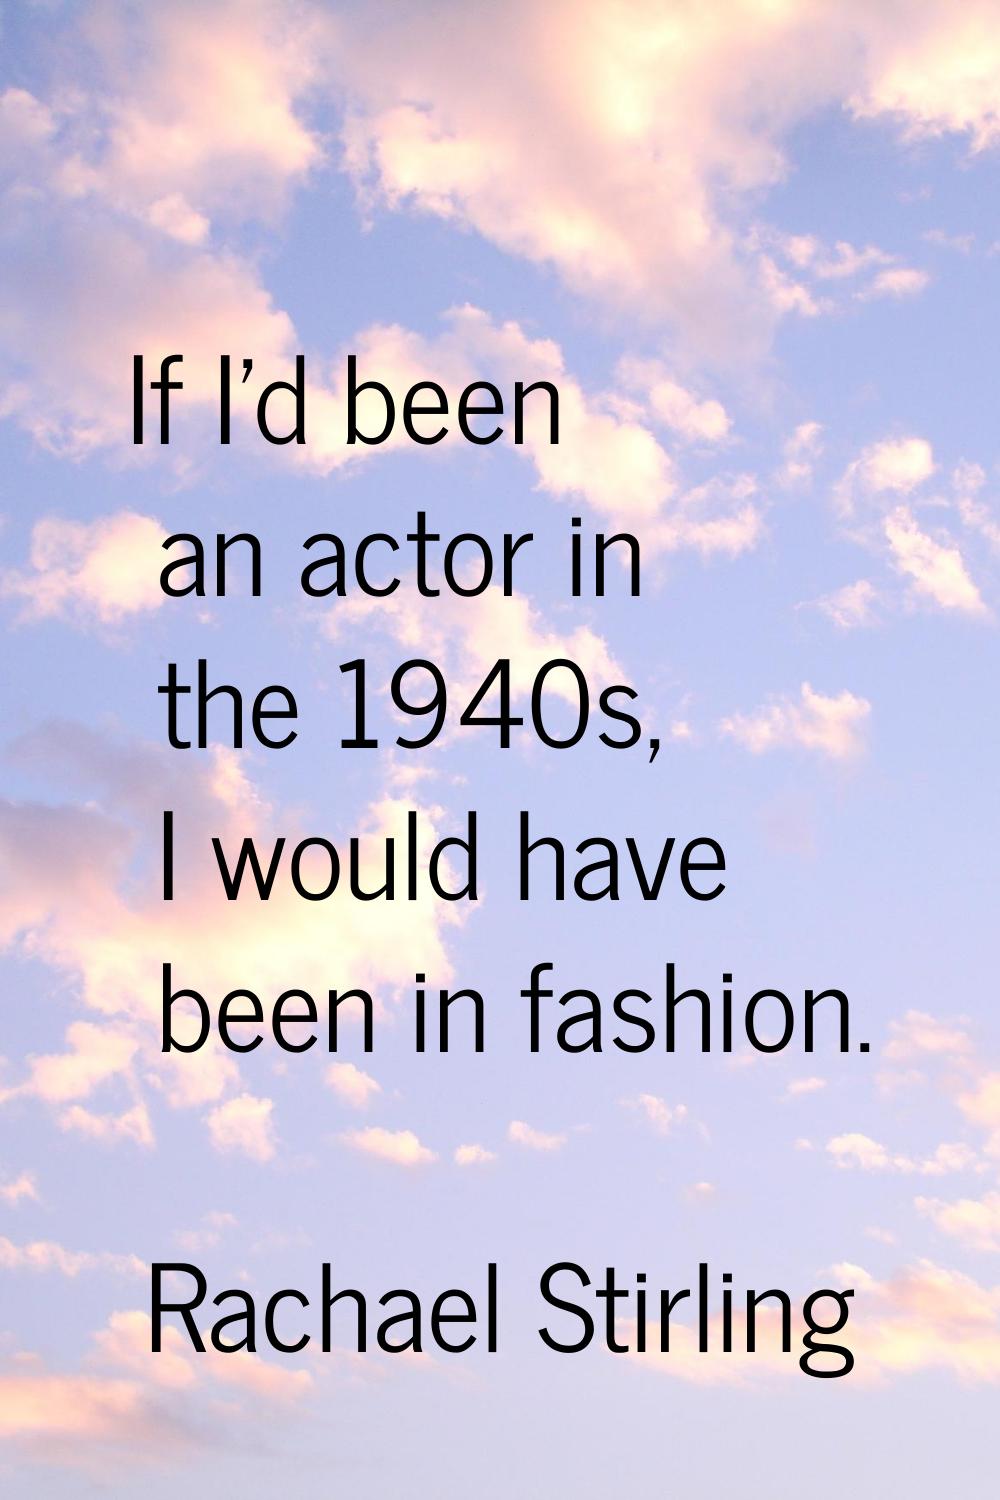 If I'd been an actor in the 1940s, I would have been in fashion.